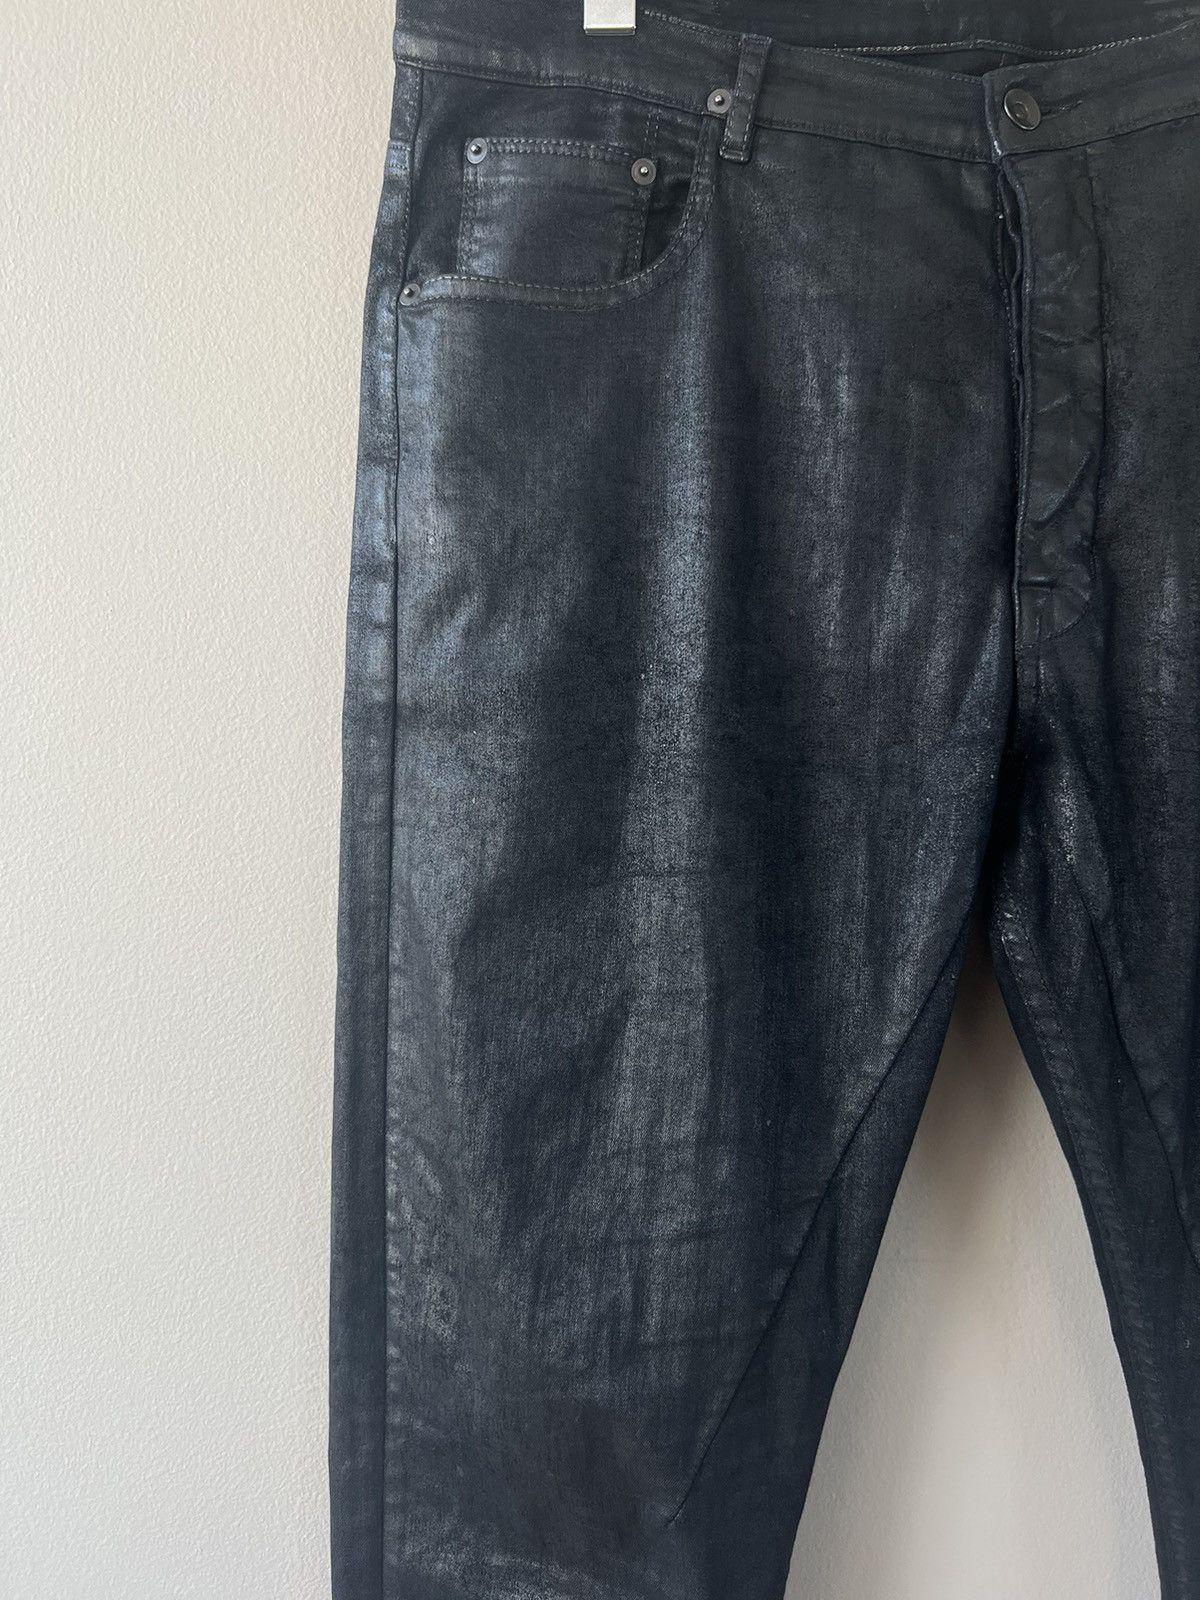 Black Waxed Torrence Cut Jeans - 6